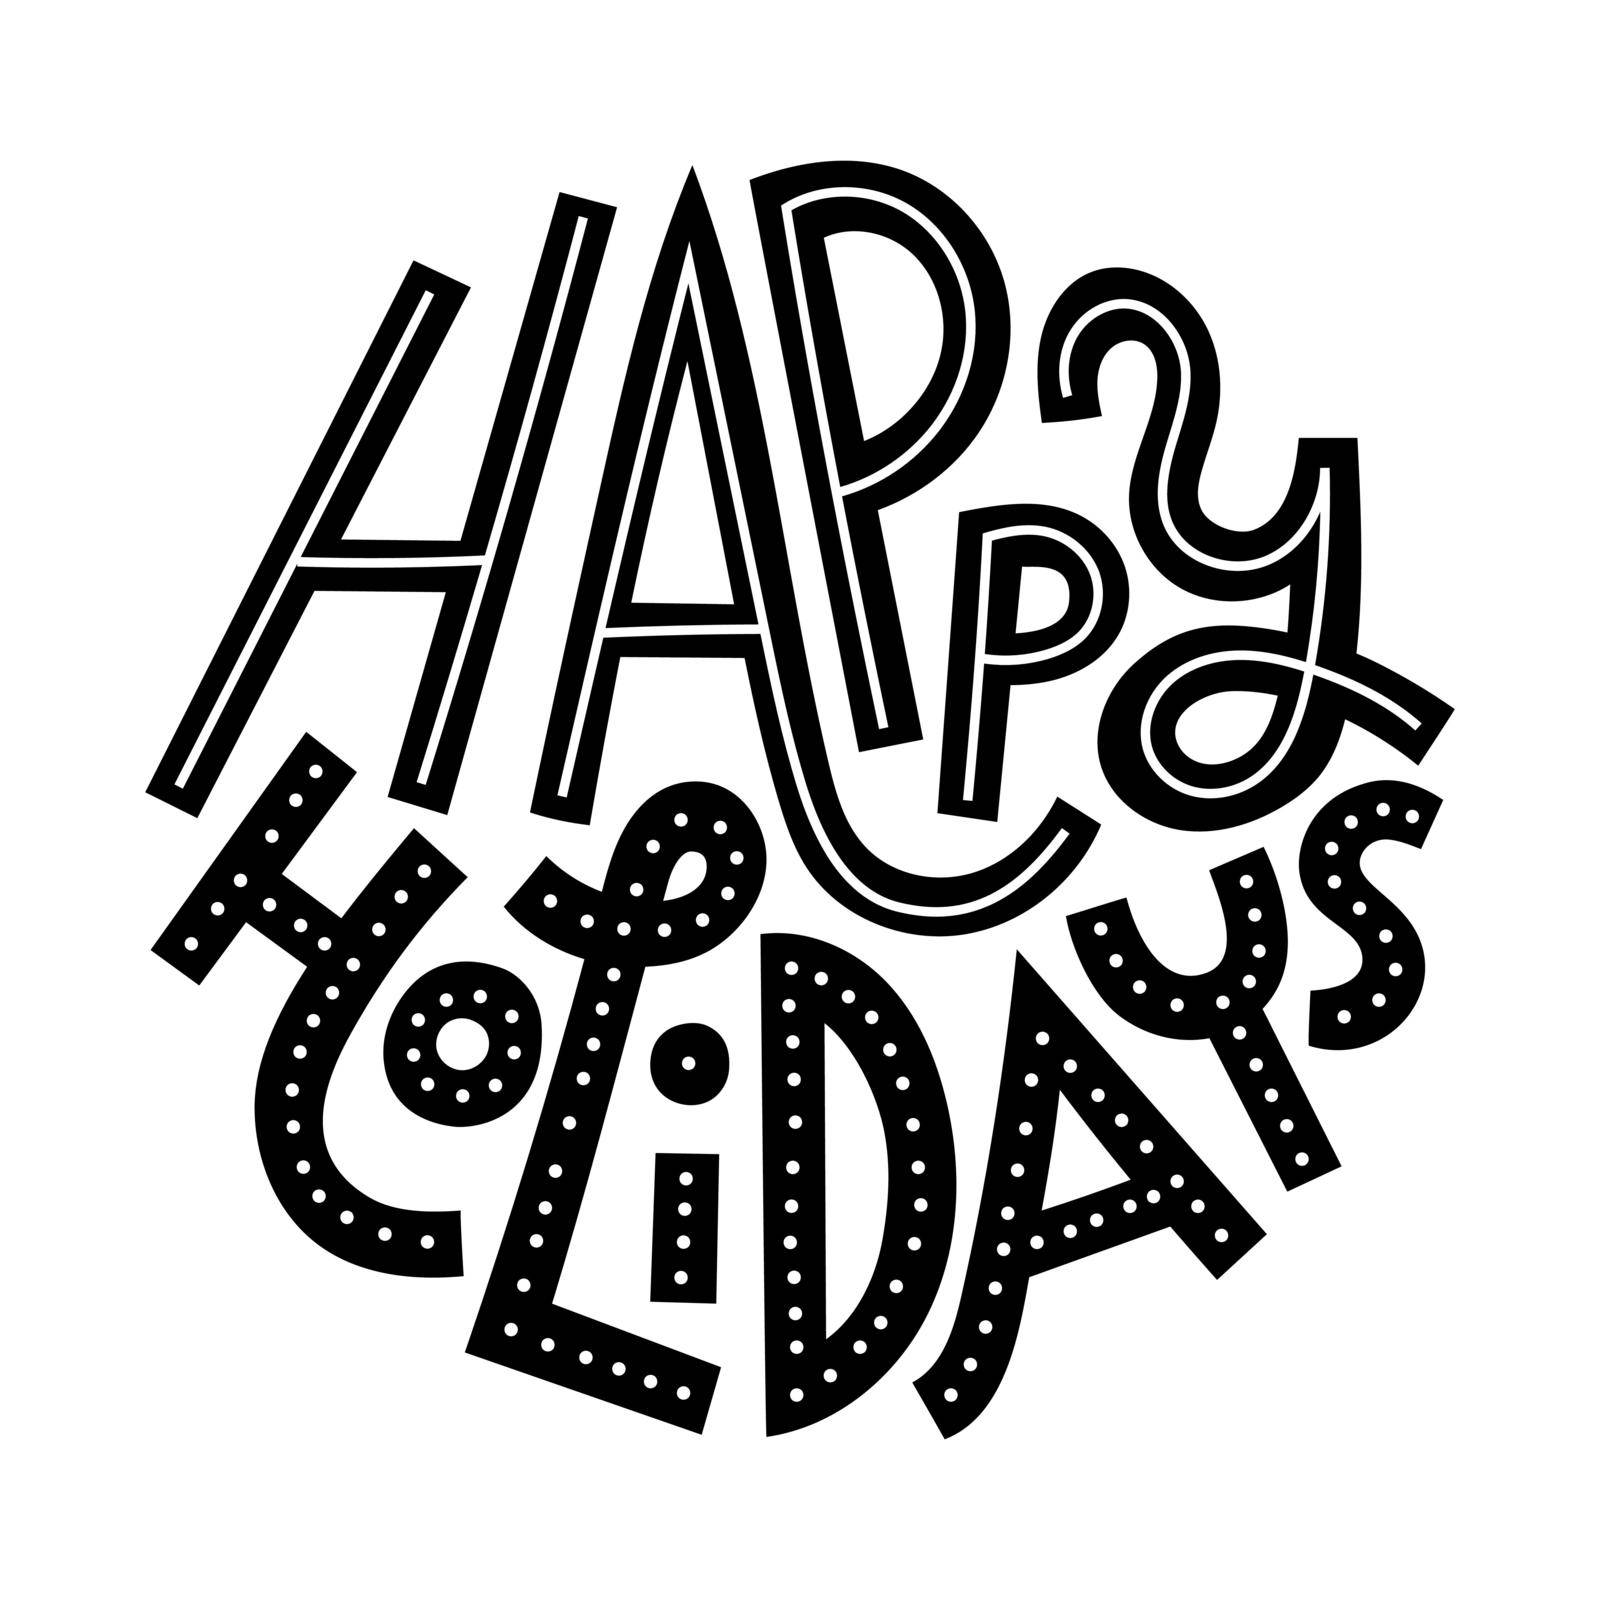 Happy holidays round-shaped lettering art by chickfishdoodles